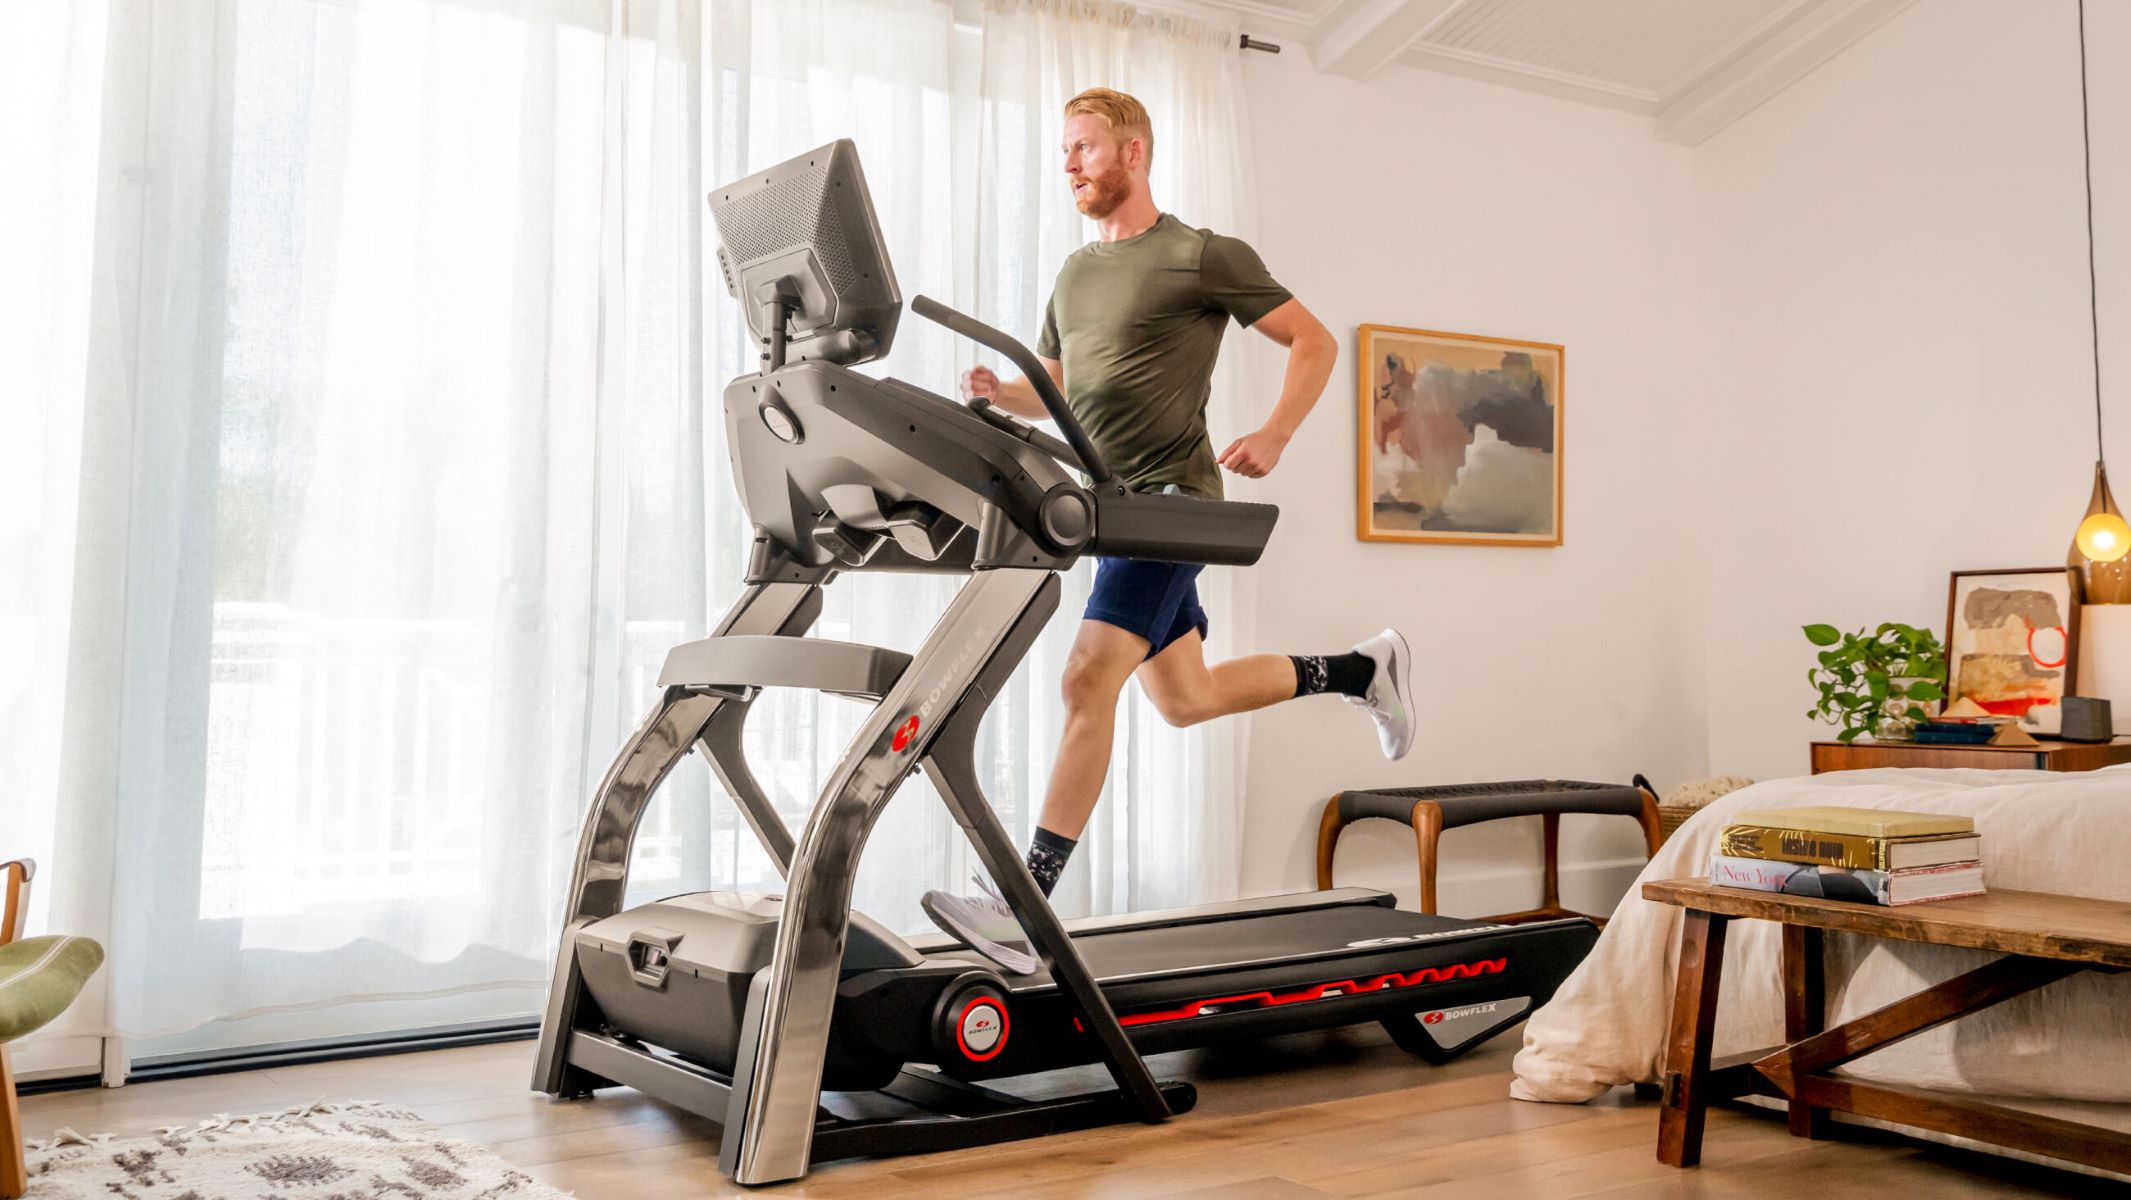 How To Use Bowflex Treadmill 10 Without Wifi